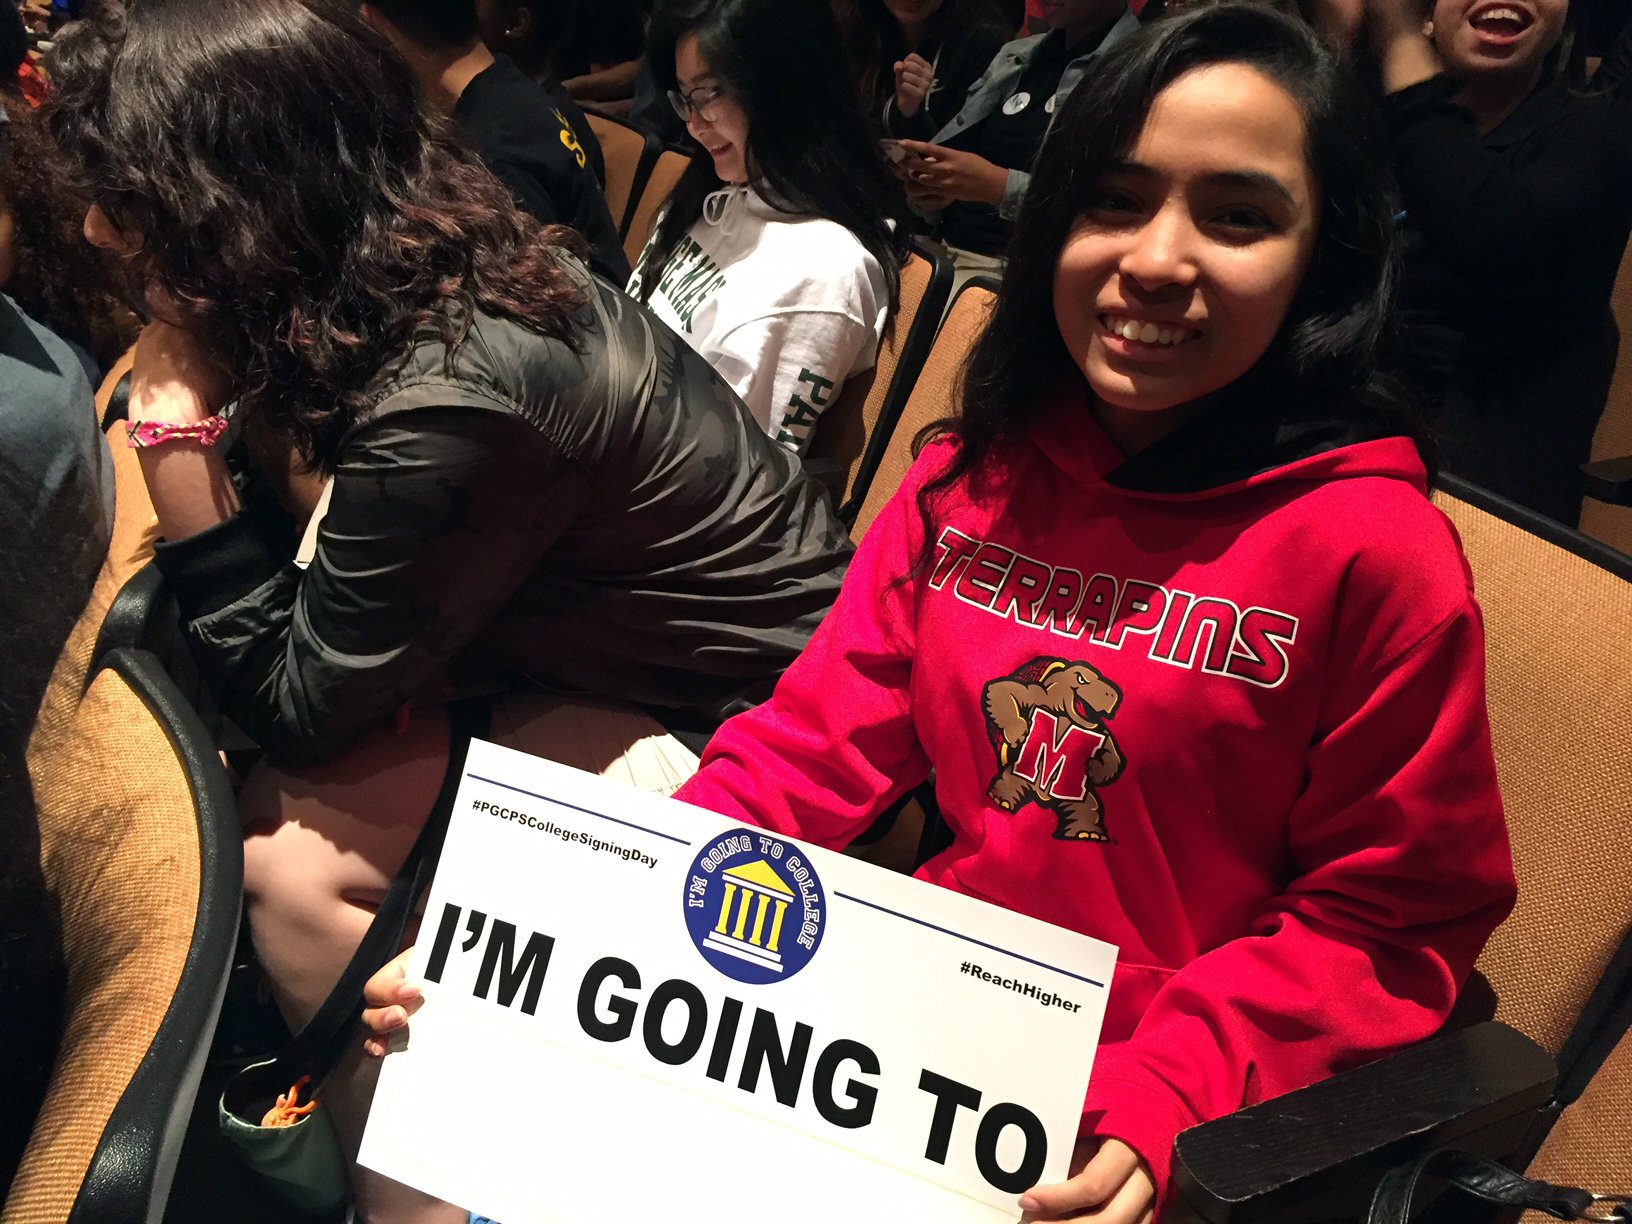 A senior getting ready to fill in the name of the college she'll be attending. (WTOP/Rich Johnson)